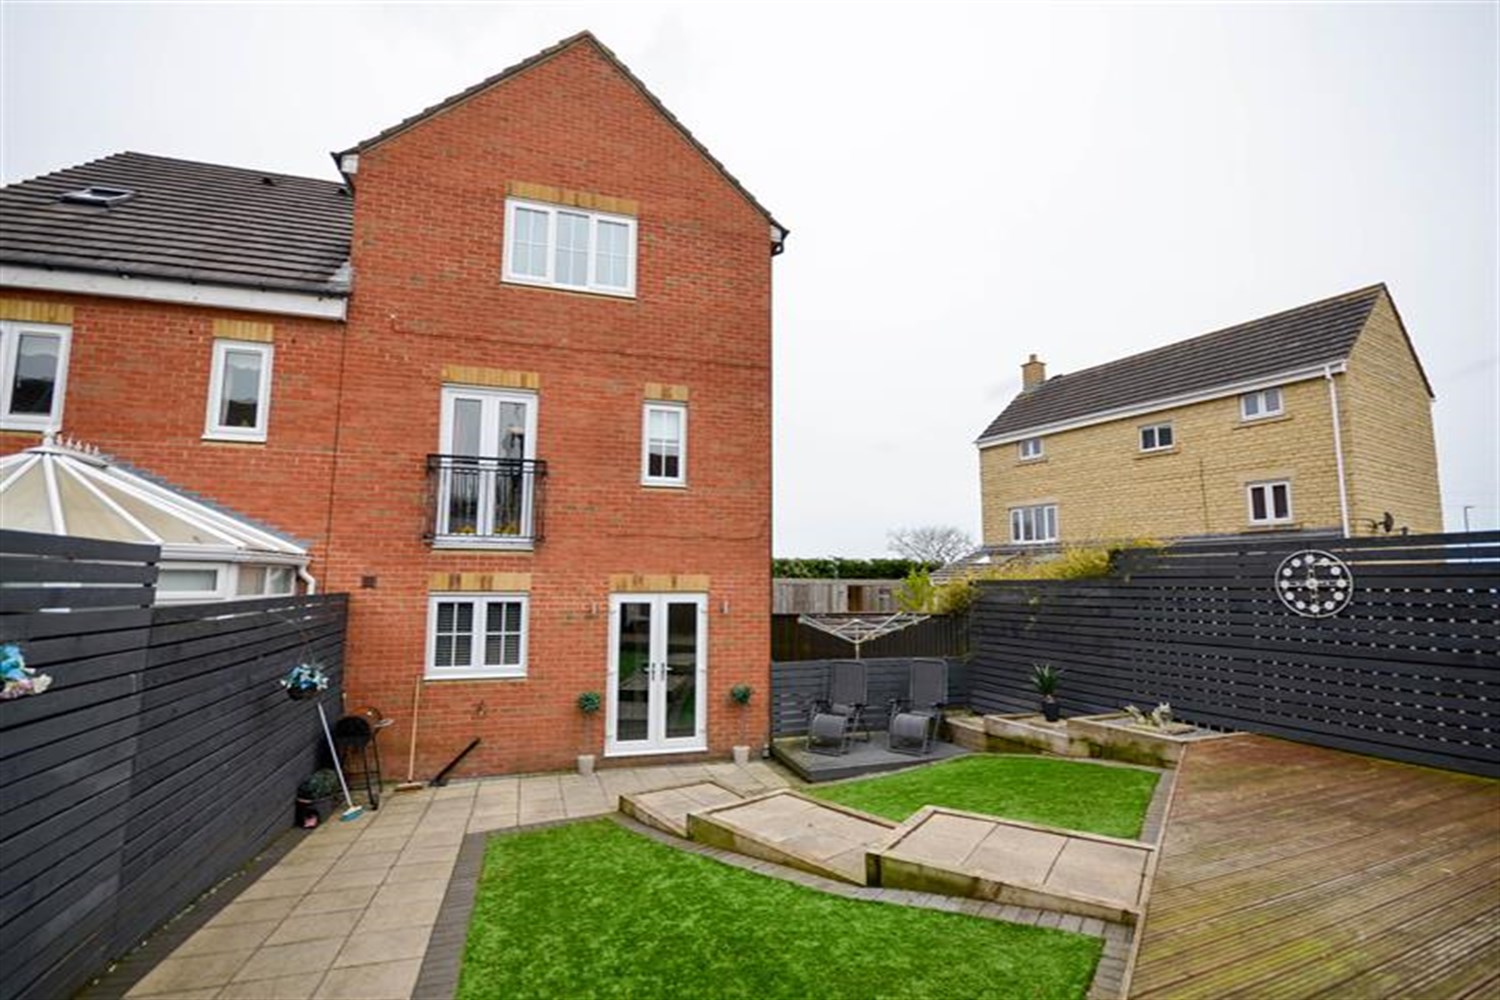 4 bed end of terraced town house for sale in Albion Street, Windy Nook - Property Image 1